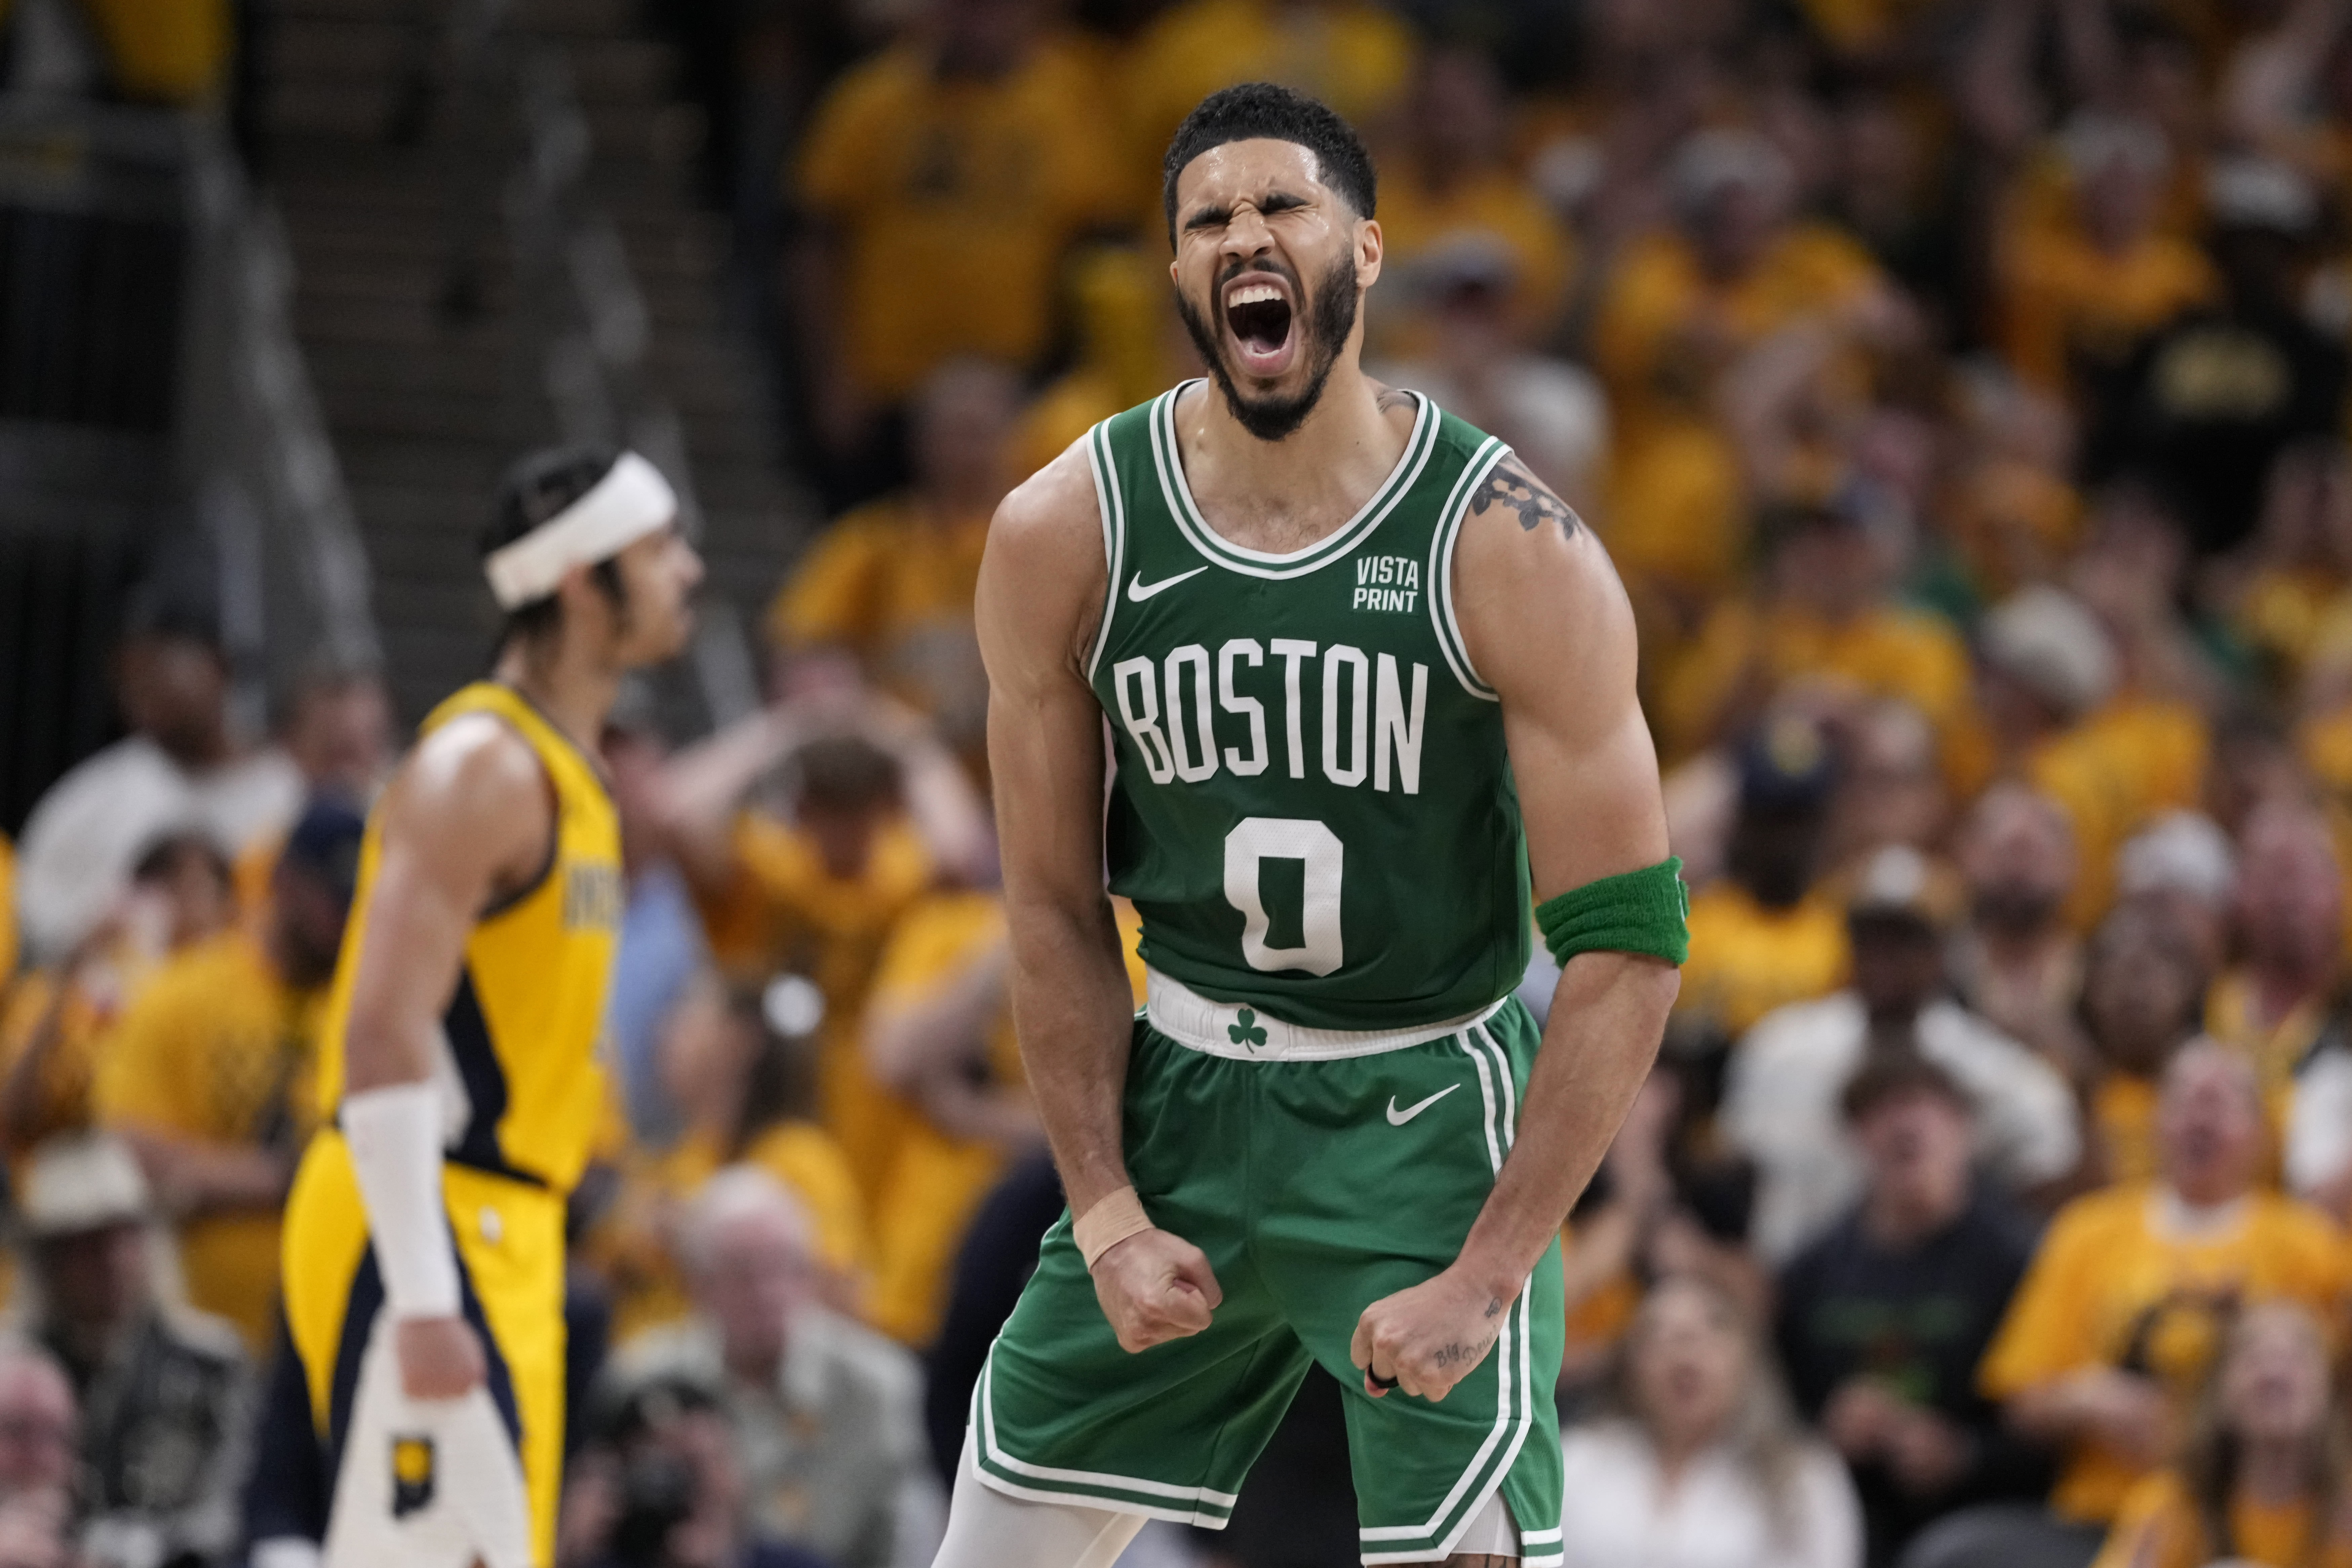 Jayson Tatum helps Celtics survive to take 3-0 series lead over Pacers. Did Boston prove its championship mettle?